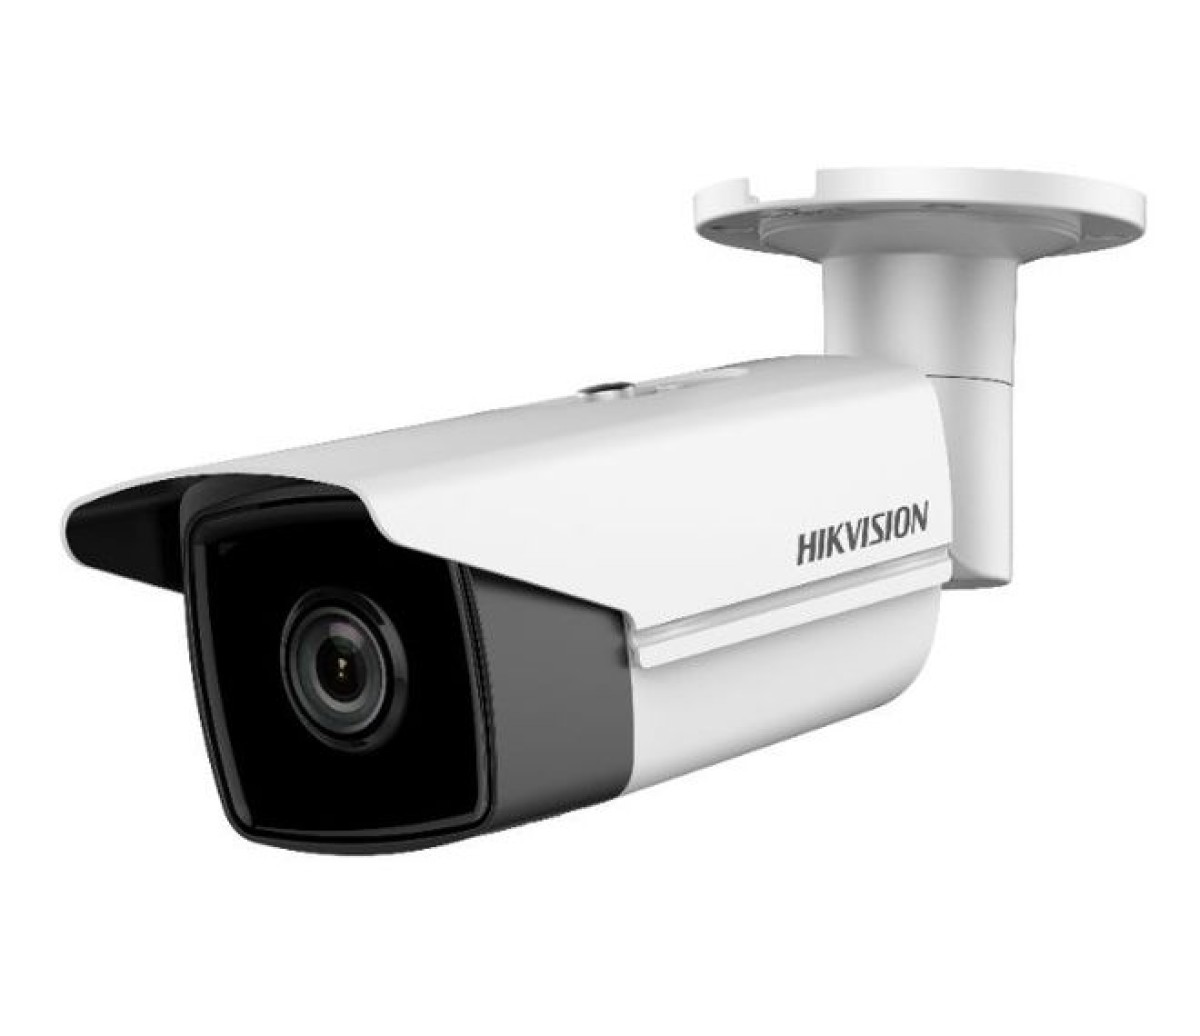 IP-камера Hikvision DS-2CD2T25FHWD-I8 (2.8) 98_85.jpg